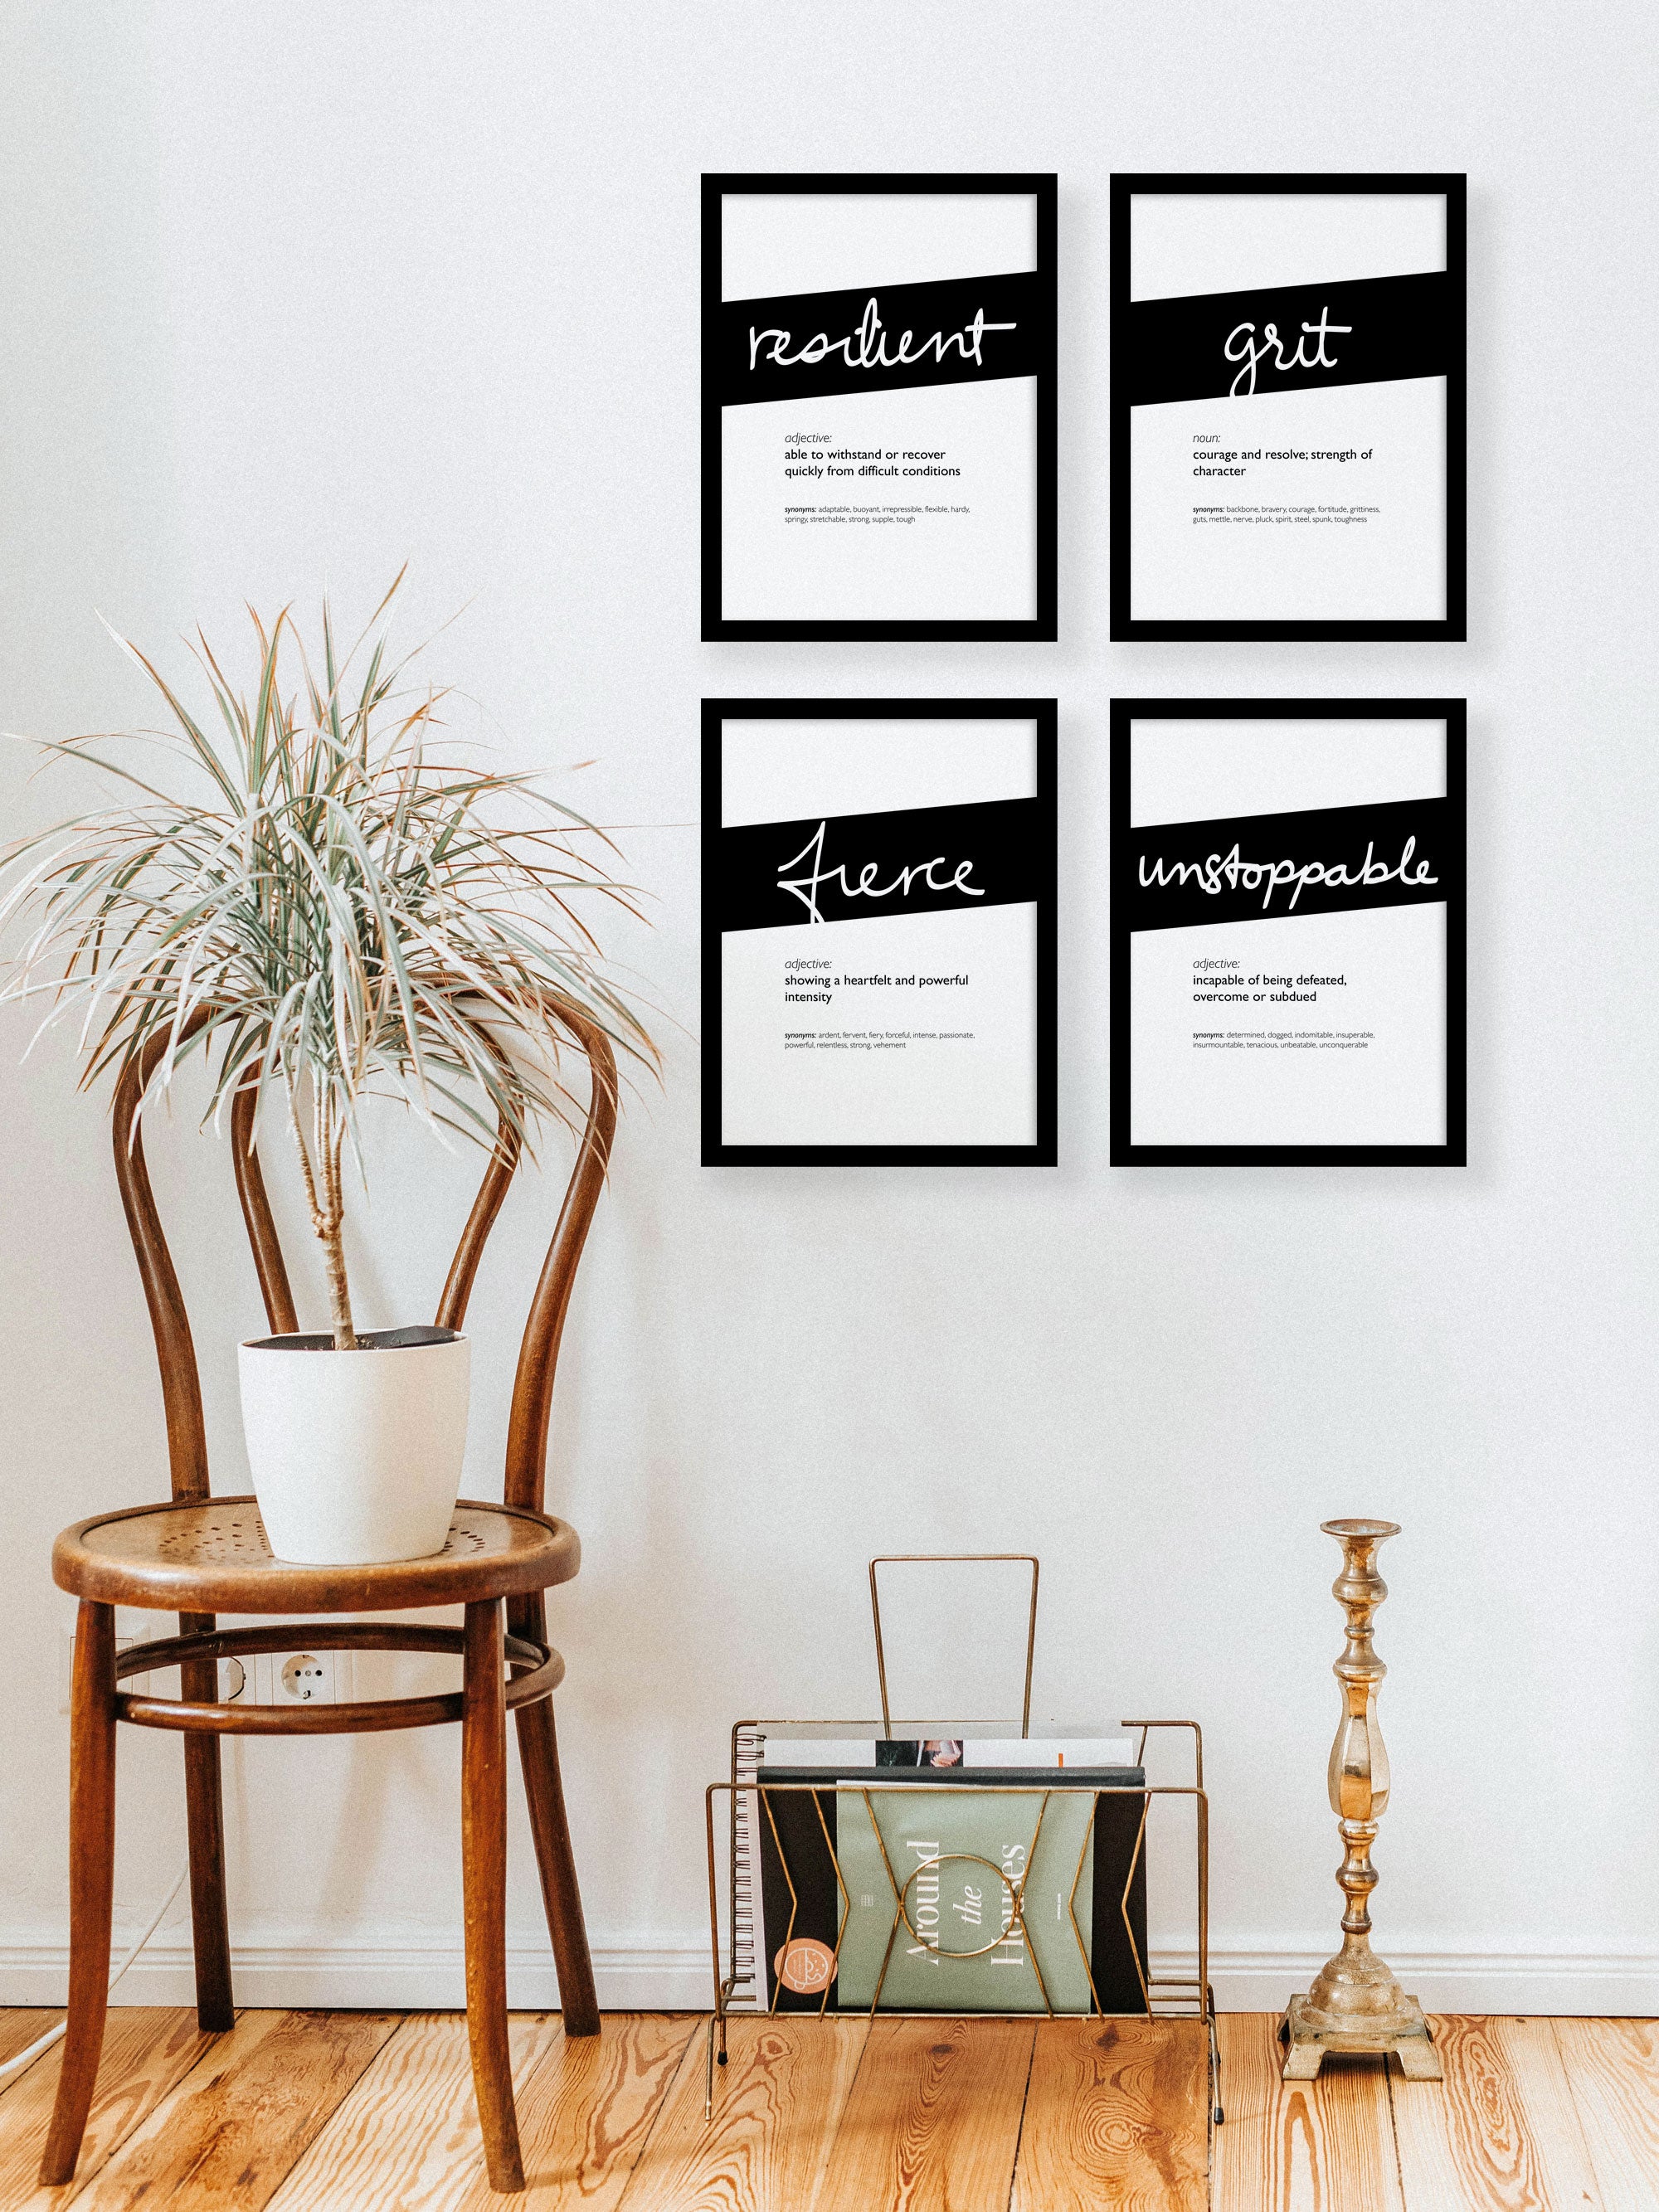 Framed Black Fierce Print With Word Definition - High Quality, Affordable, Hand Written, Empowering, Self Love, Mantra Word Print. Archival-Quality, Matte Giclée Print - Brevity Jewelry